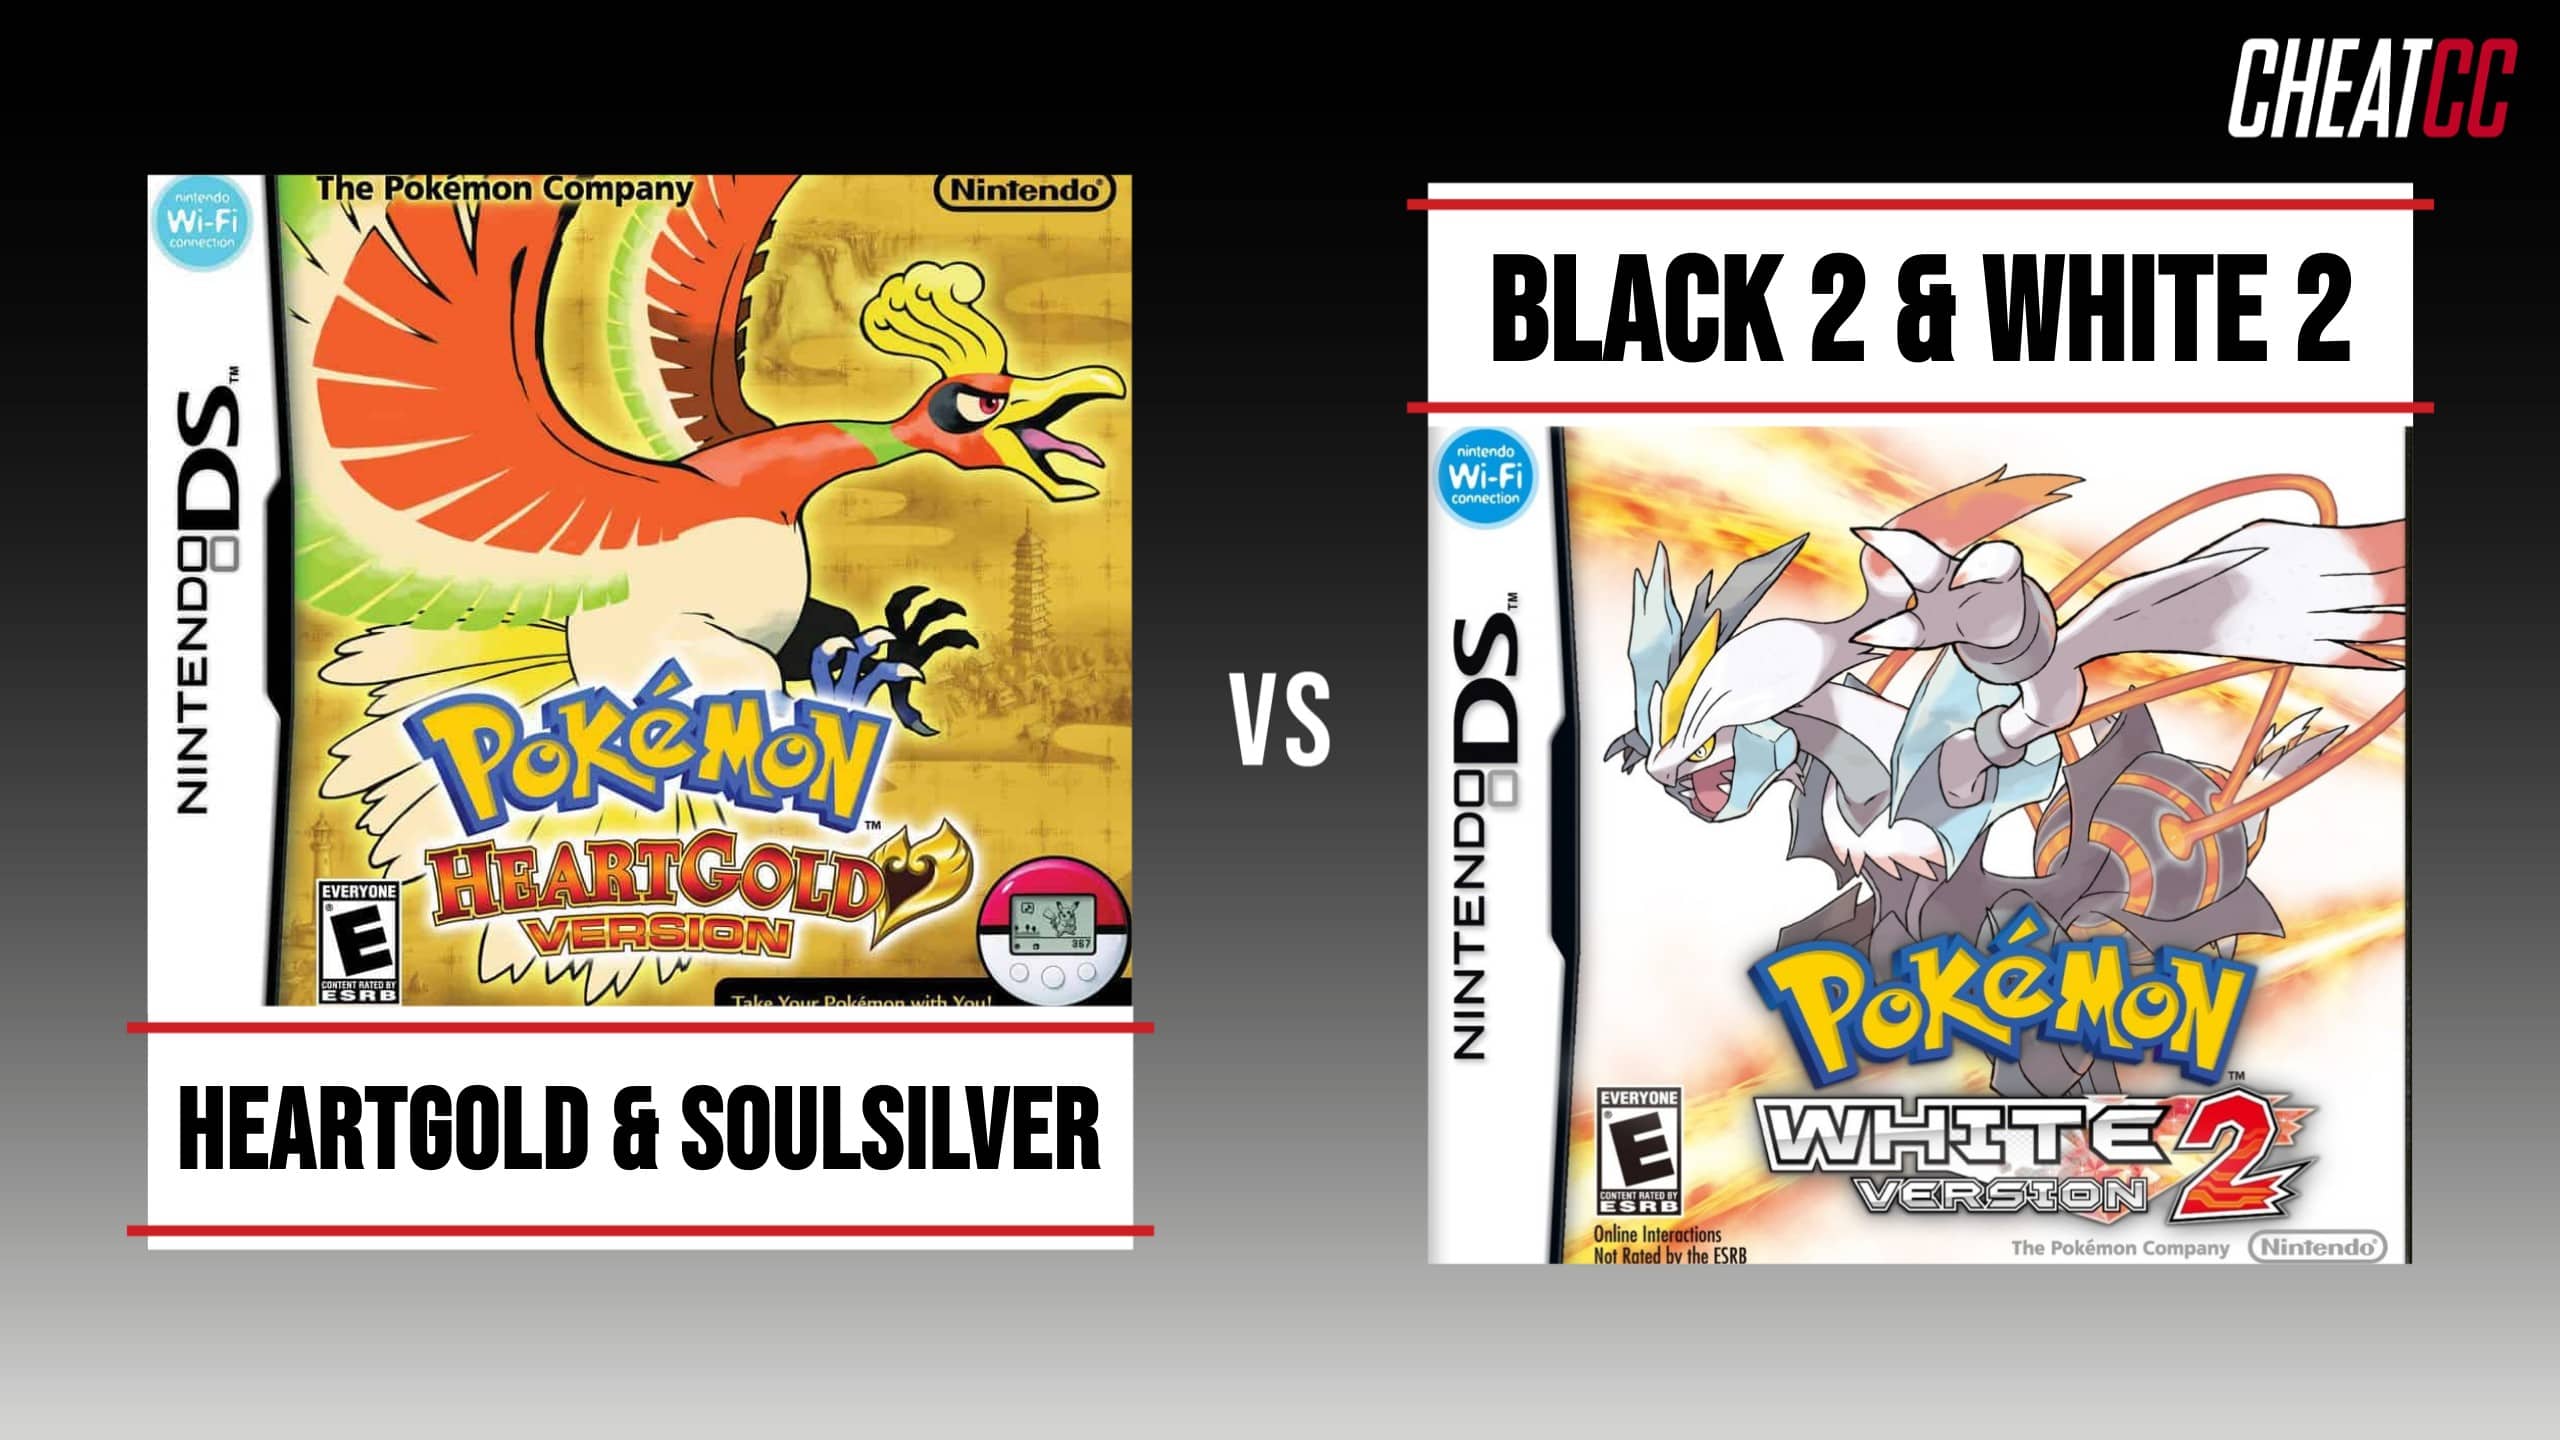 Pokemon Black Version 2 Cheats and Hints for Nintendo DS